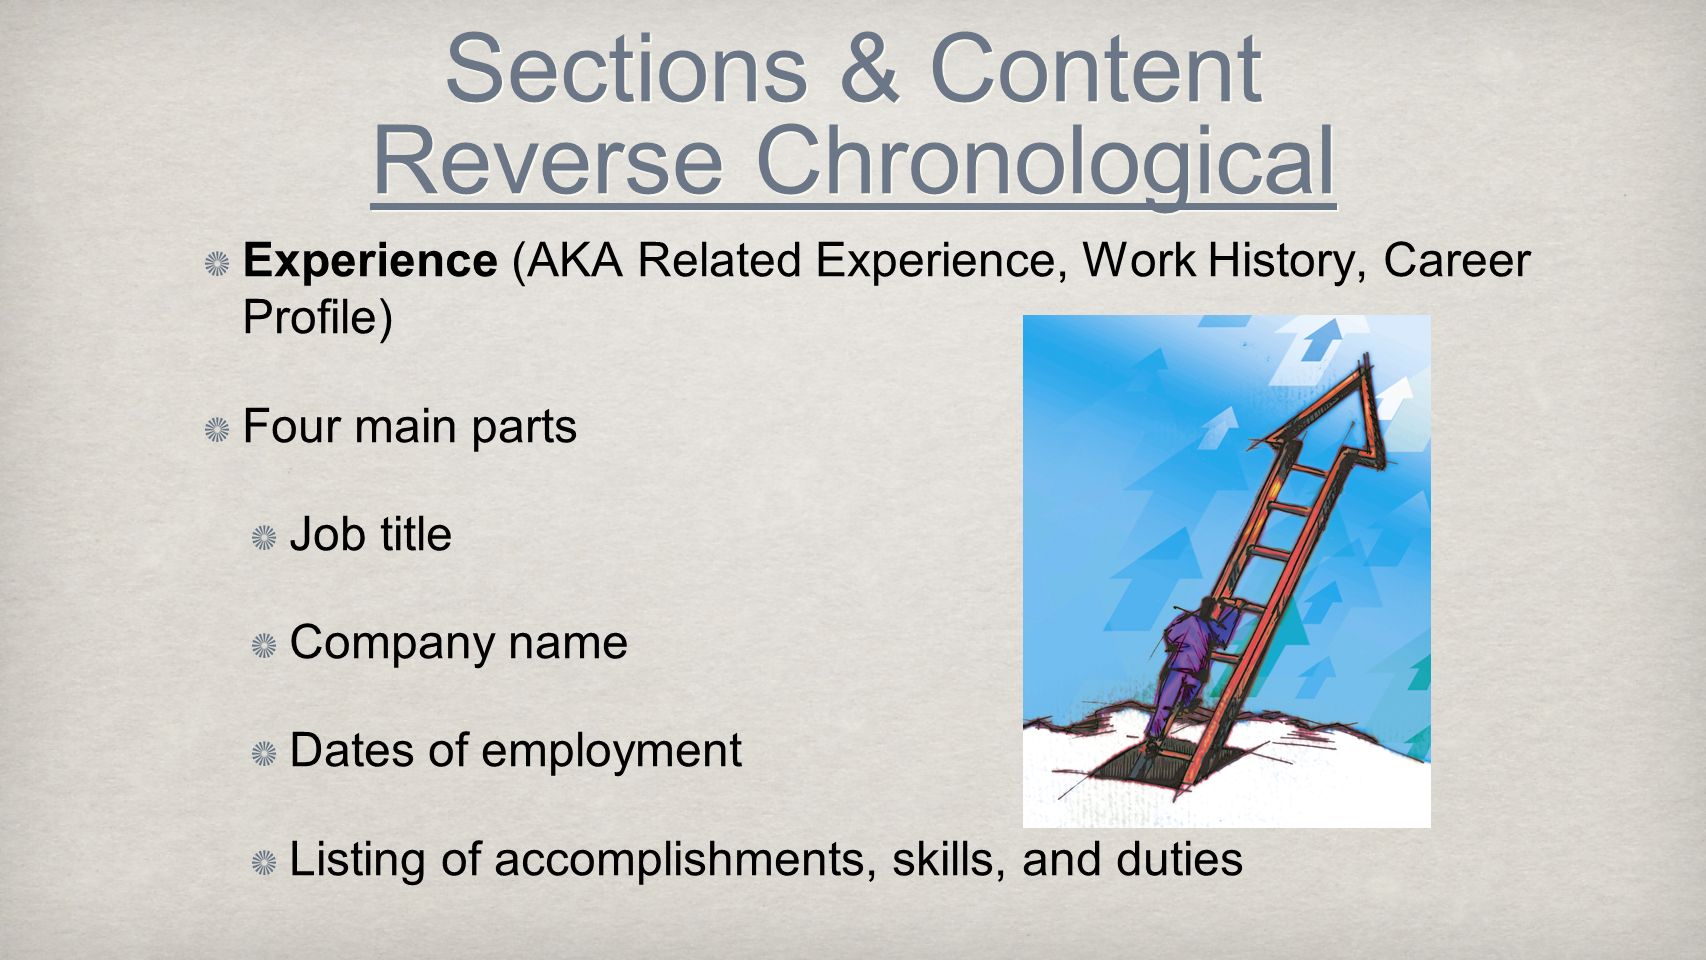 Sections & Content Reverse Chronological Experience (AKA Related Experience, Work History, Career Profile) Four main parts Job title Company name Dates of employment Listing of accomplishments, skills, and duties